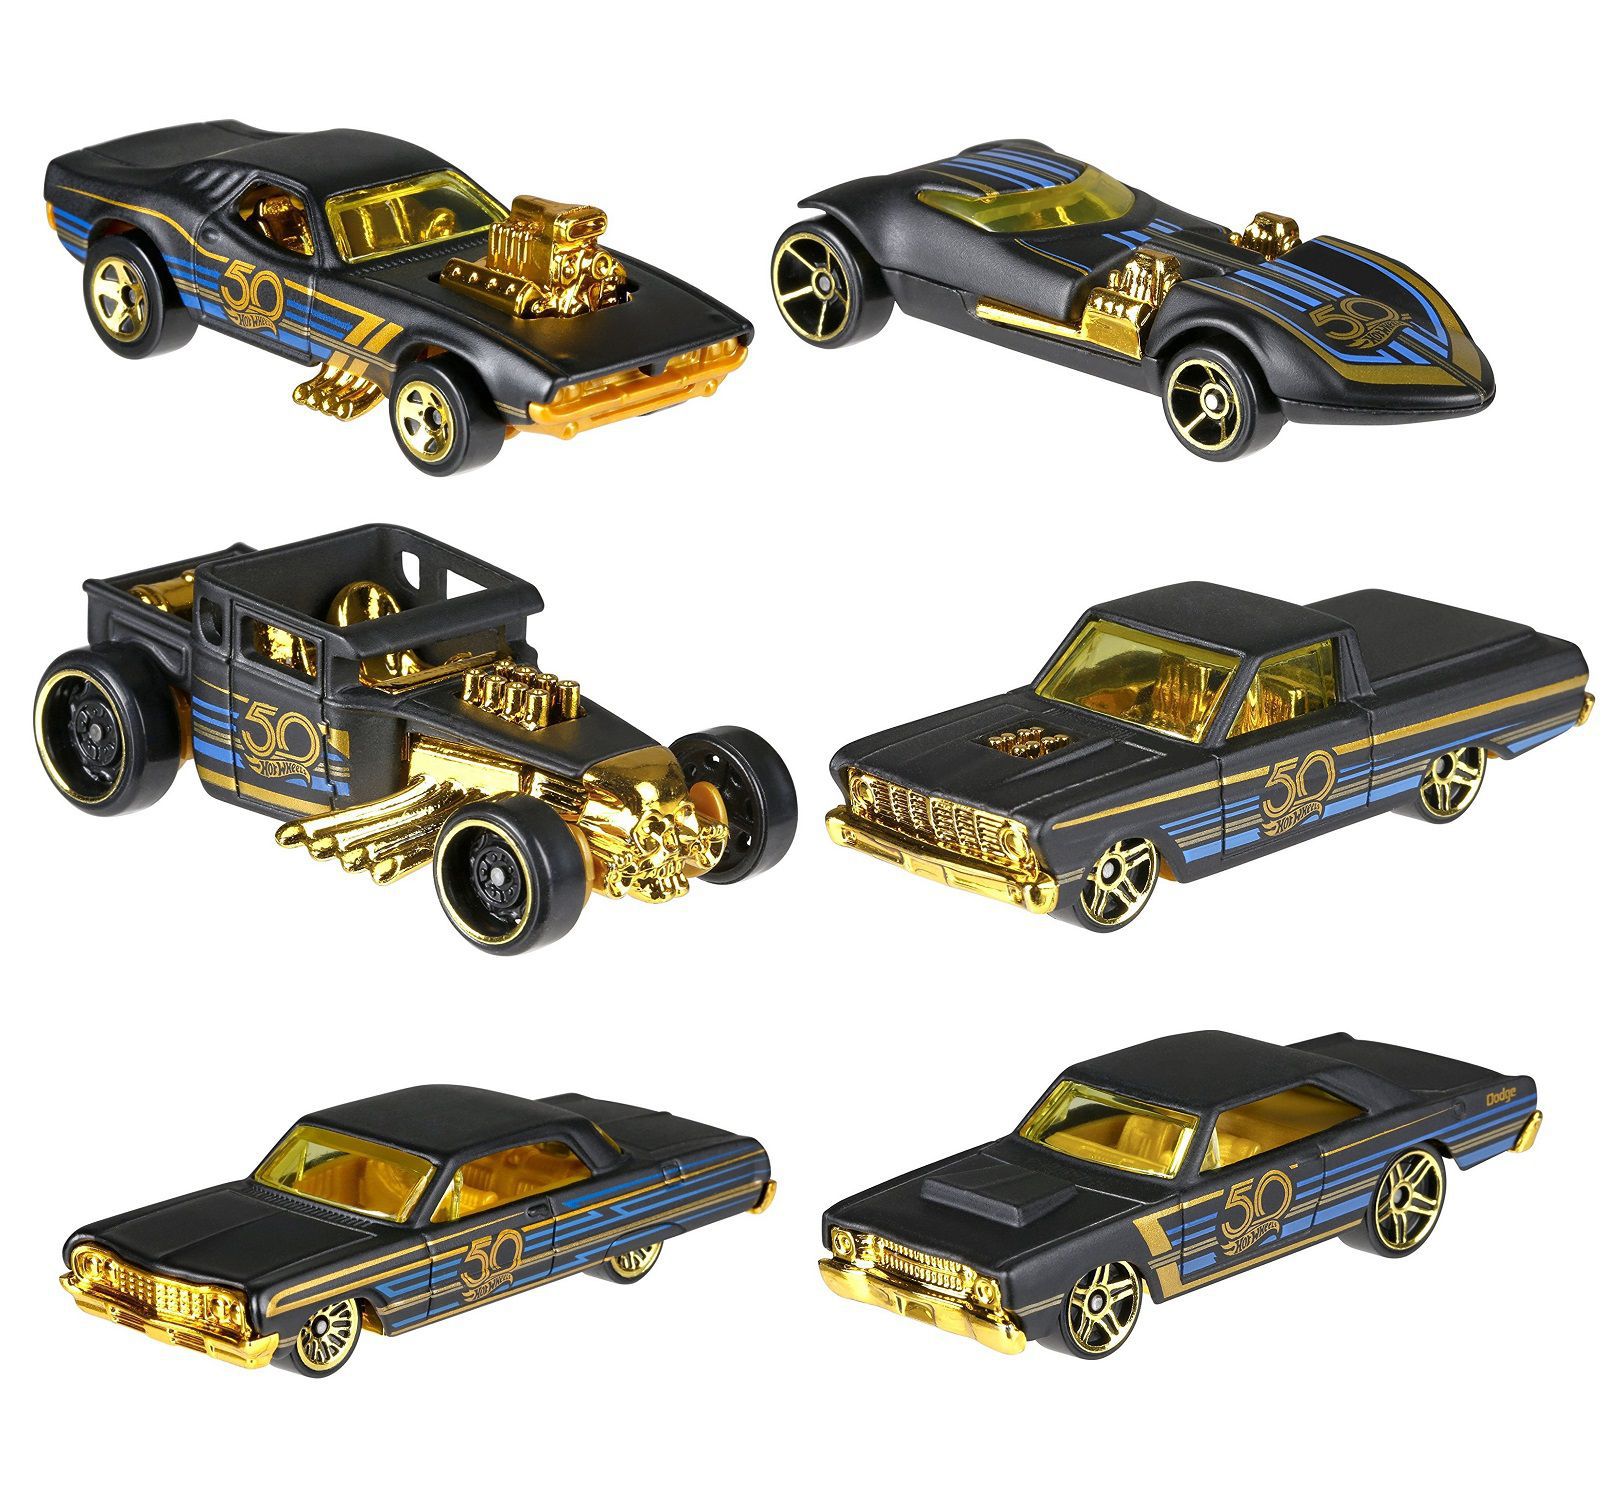 Hot Wheels 50th Anniversary Black Gold Edition Cars-Pack of 6 - Buy Hot